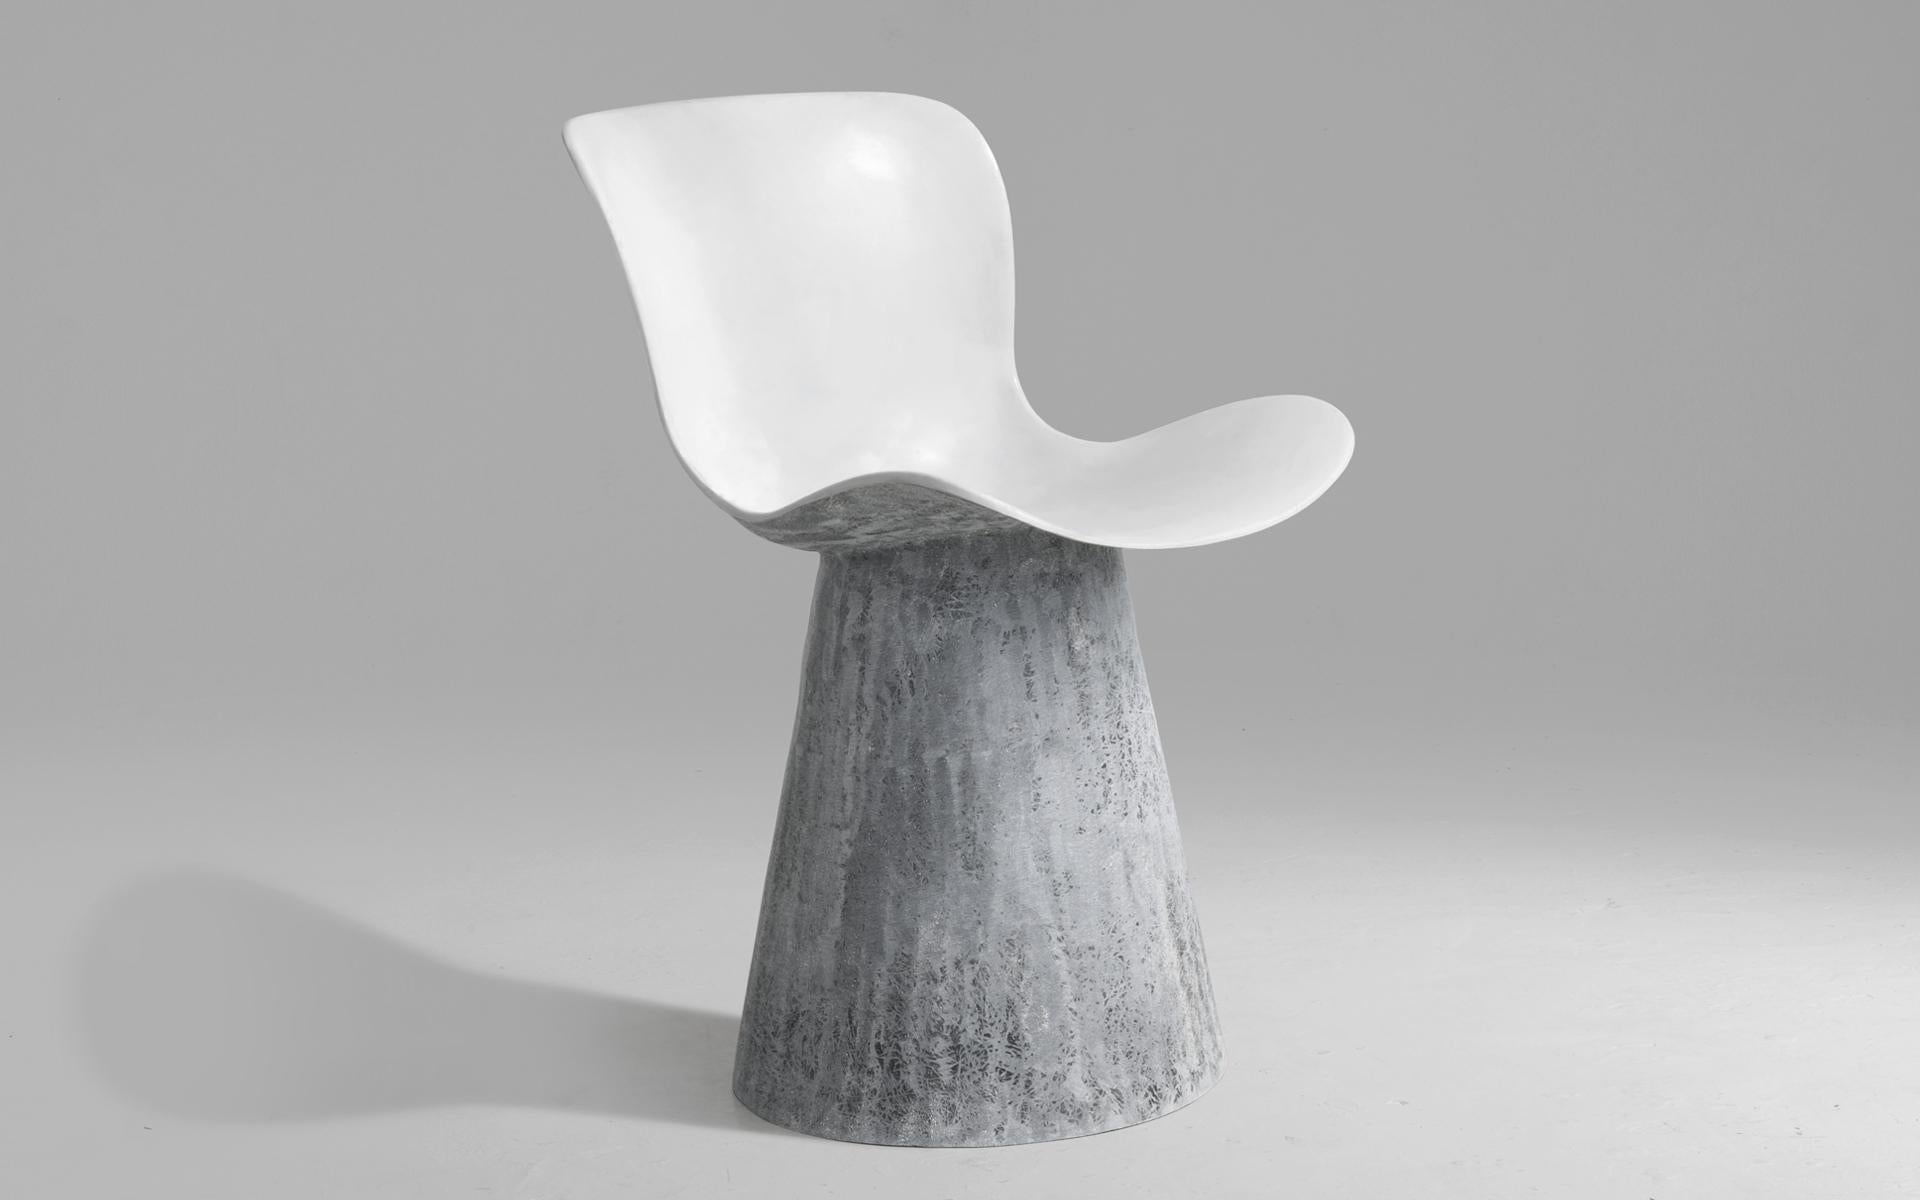 Equilibria chair by Imperfettolab
Dimensions: 45 x 53 x H 76 cm
Materials: Fibreglass

Imperfetto Lab
Who we are ? We are a family.
Verter Turroni, Emanuela Ravelli and our children Elia, Margherita and Eusebio.
All together, we are separate